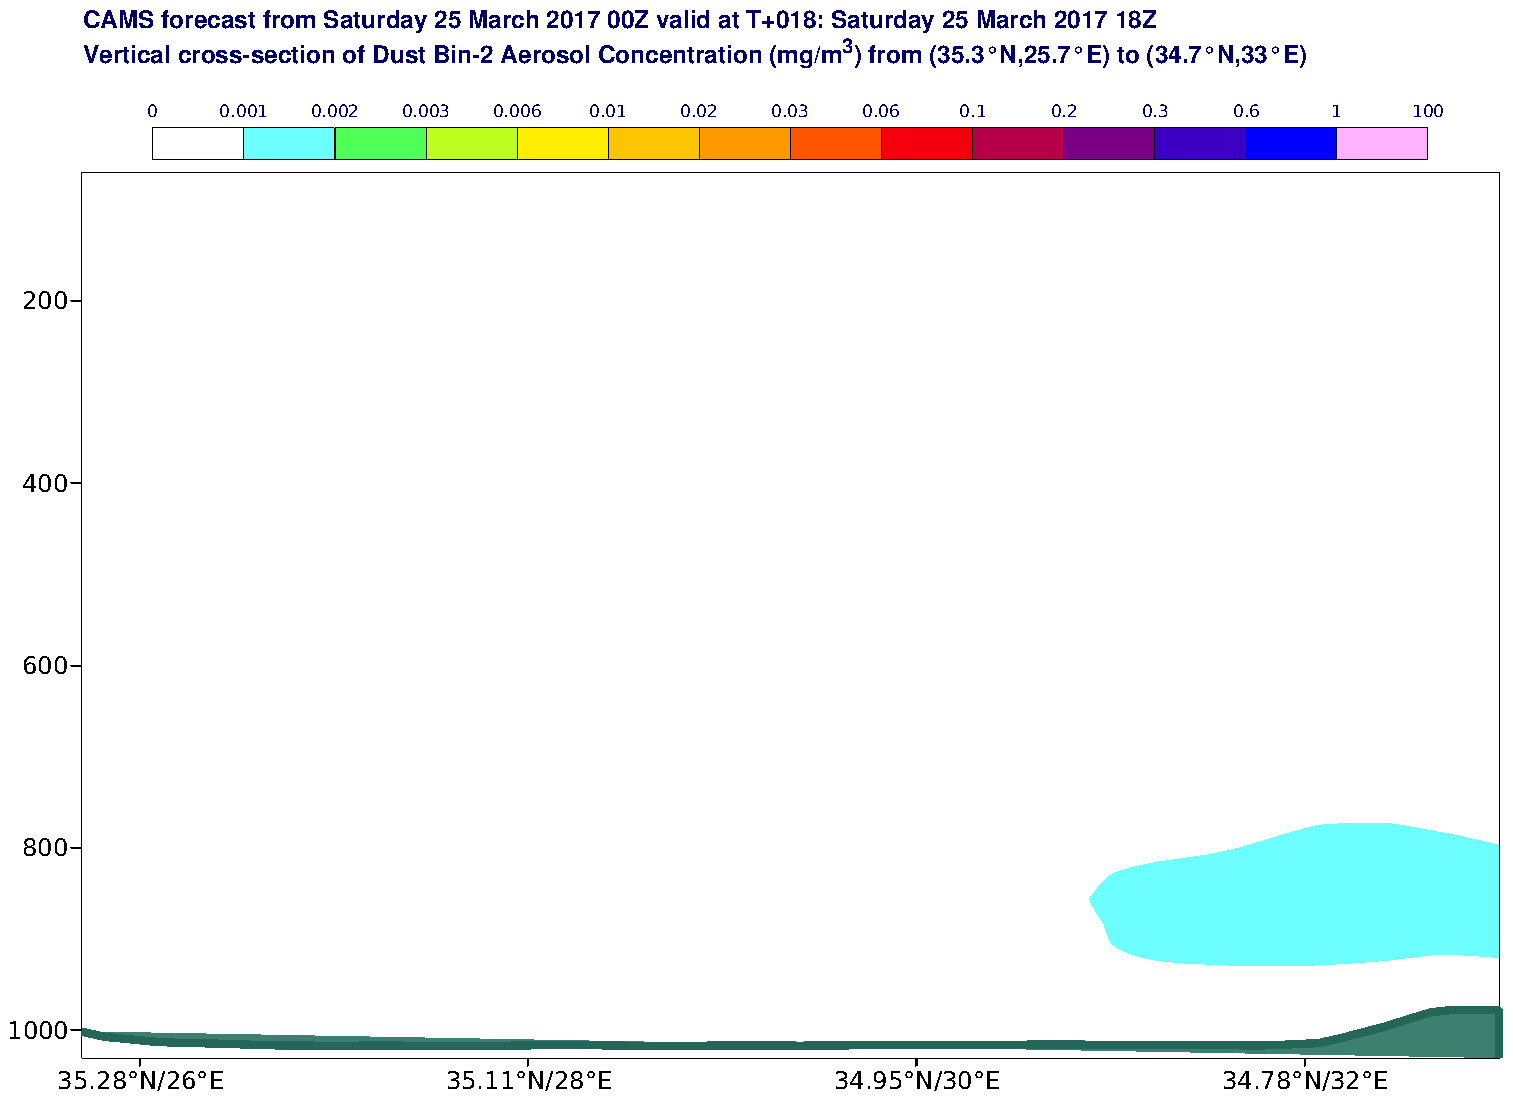 Vertical cross-section of Dust Bin-2 Aerosol Concentration (mg/m3) valid at T18 - 2017-03-25 18:00